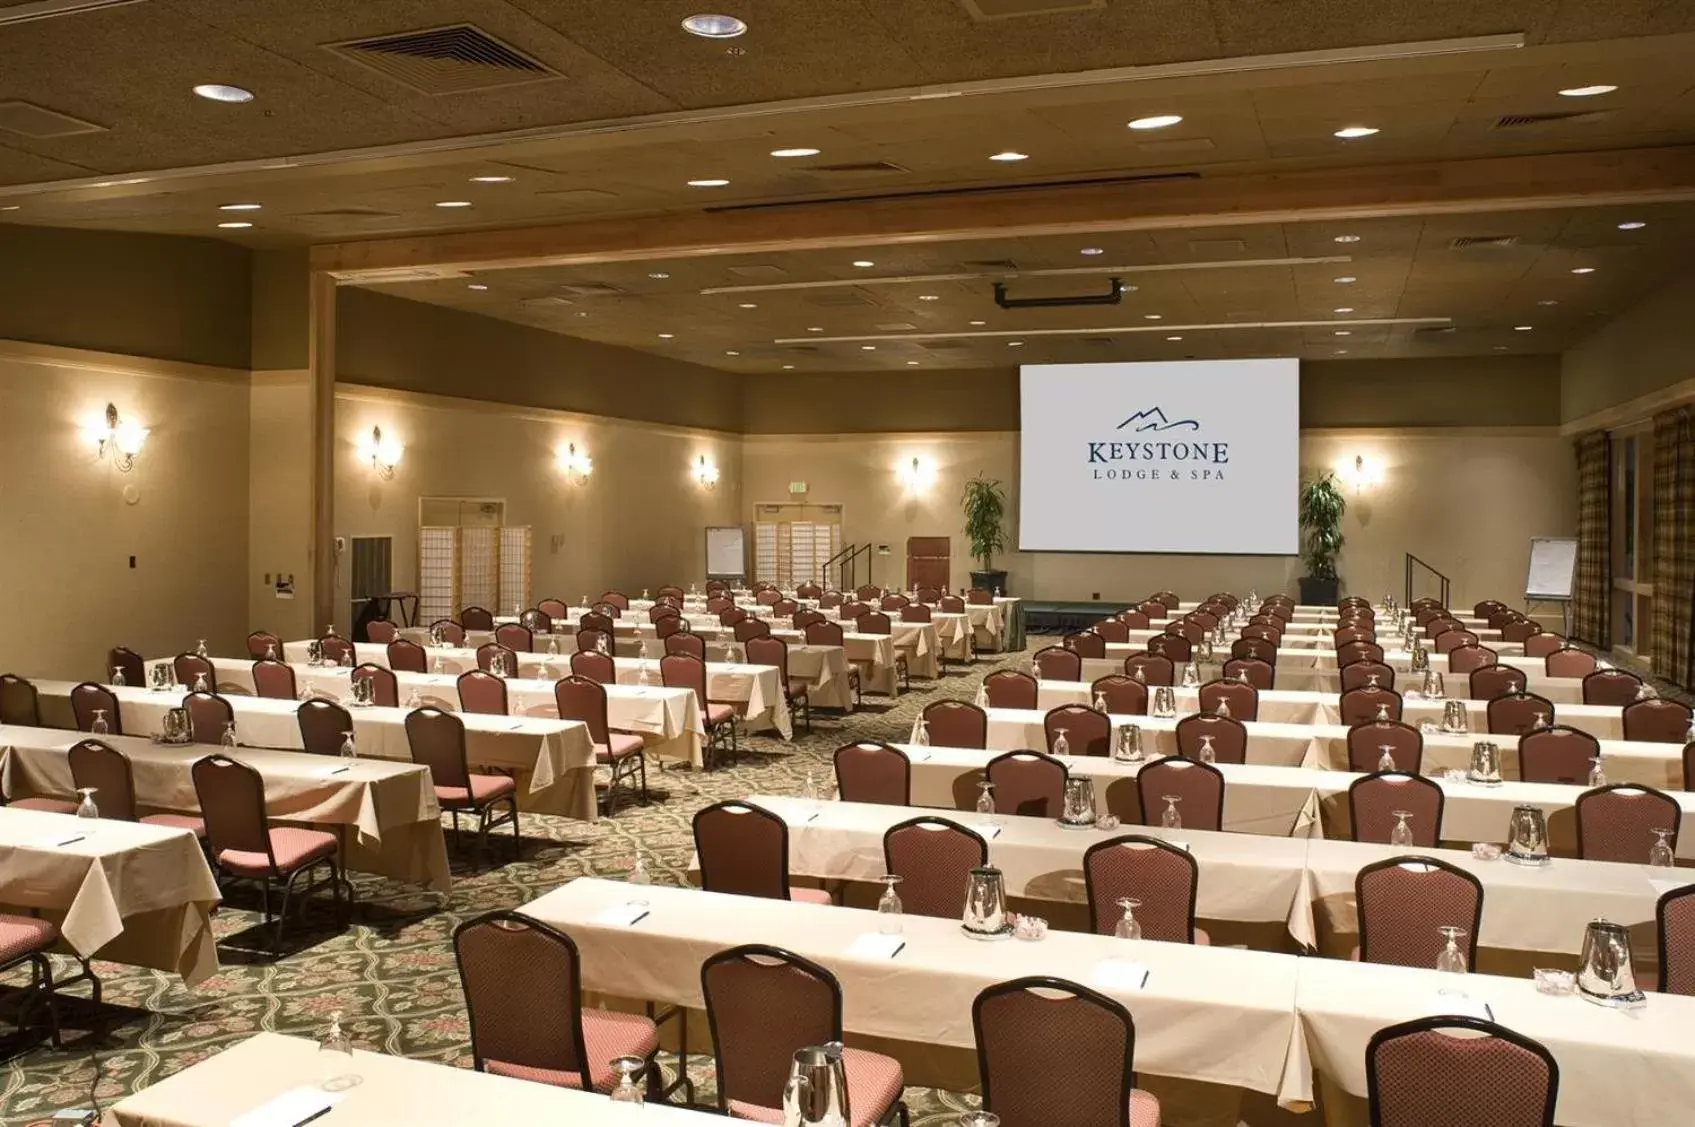 Meeting/conference room in The Keystone Lodge and Spa by Keystone Resort